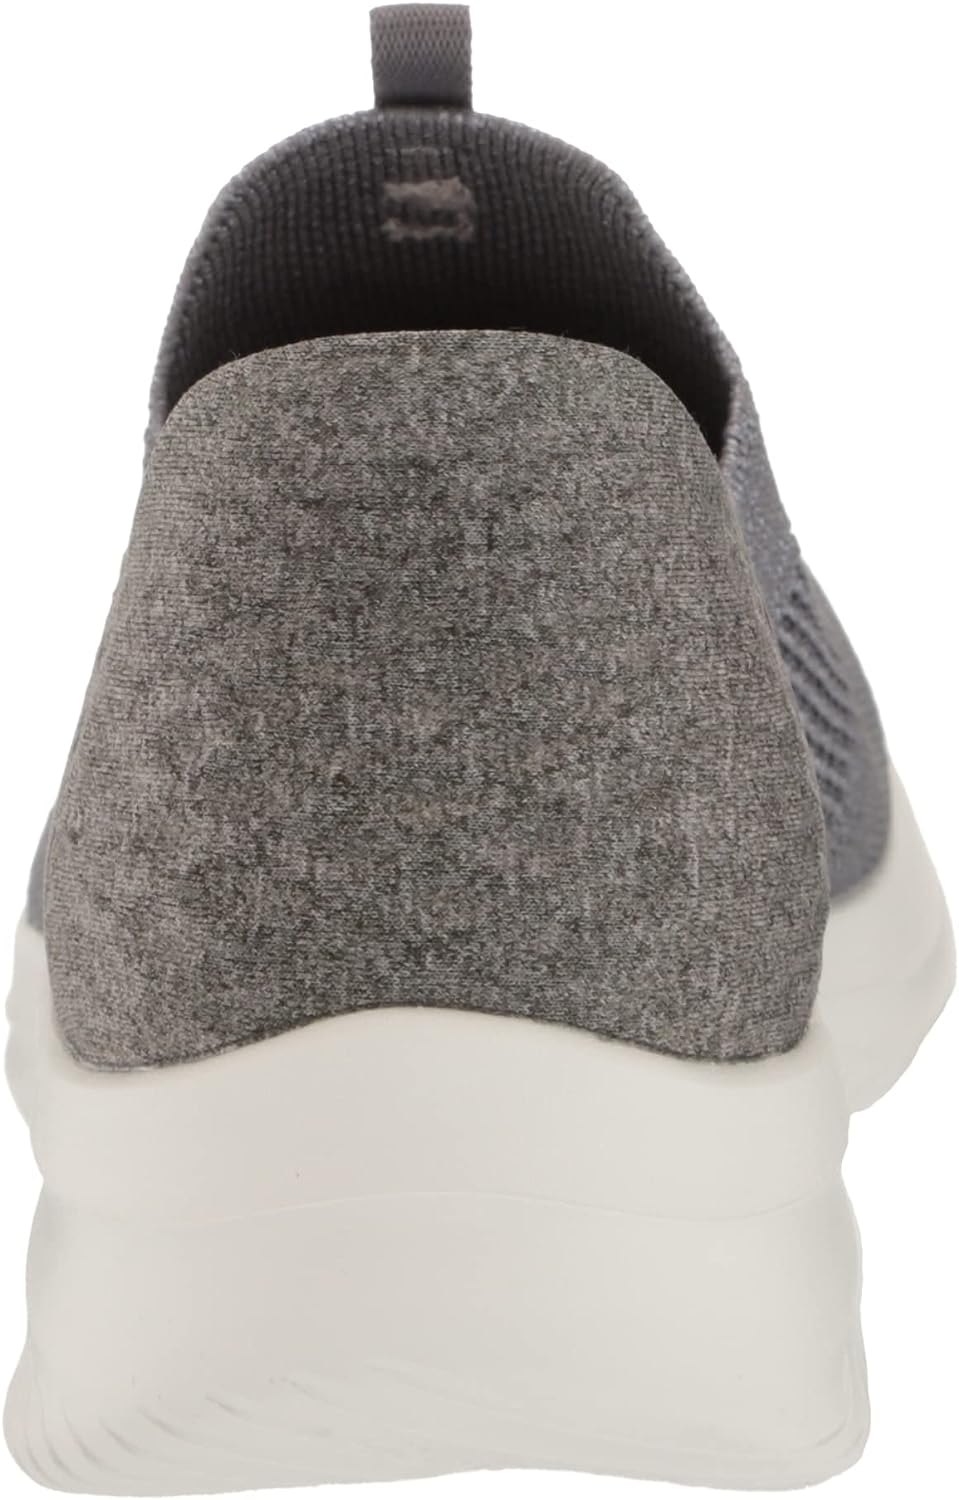 Skechers Women's Hands Free Slip Ins Ultra Flex 3.0 Smooth Step Sneaker - A Review of Style and Comfort